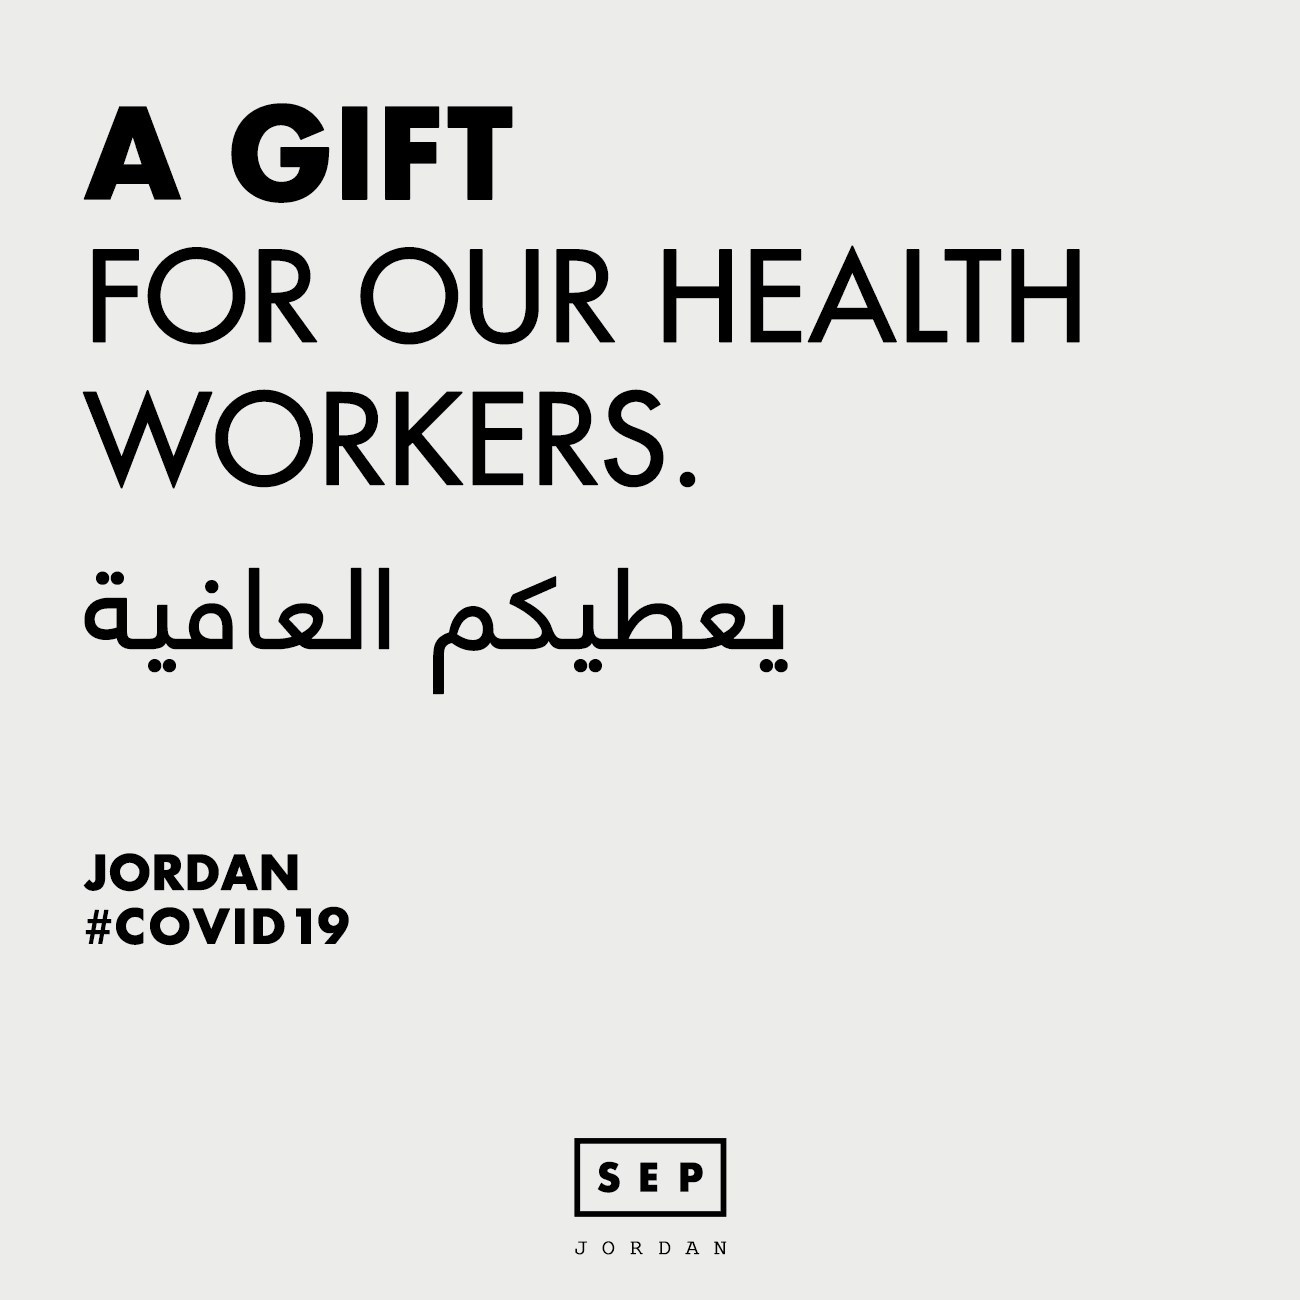 A Gift for our Health Workers - Jordan